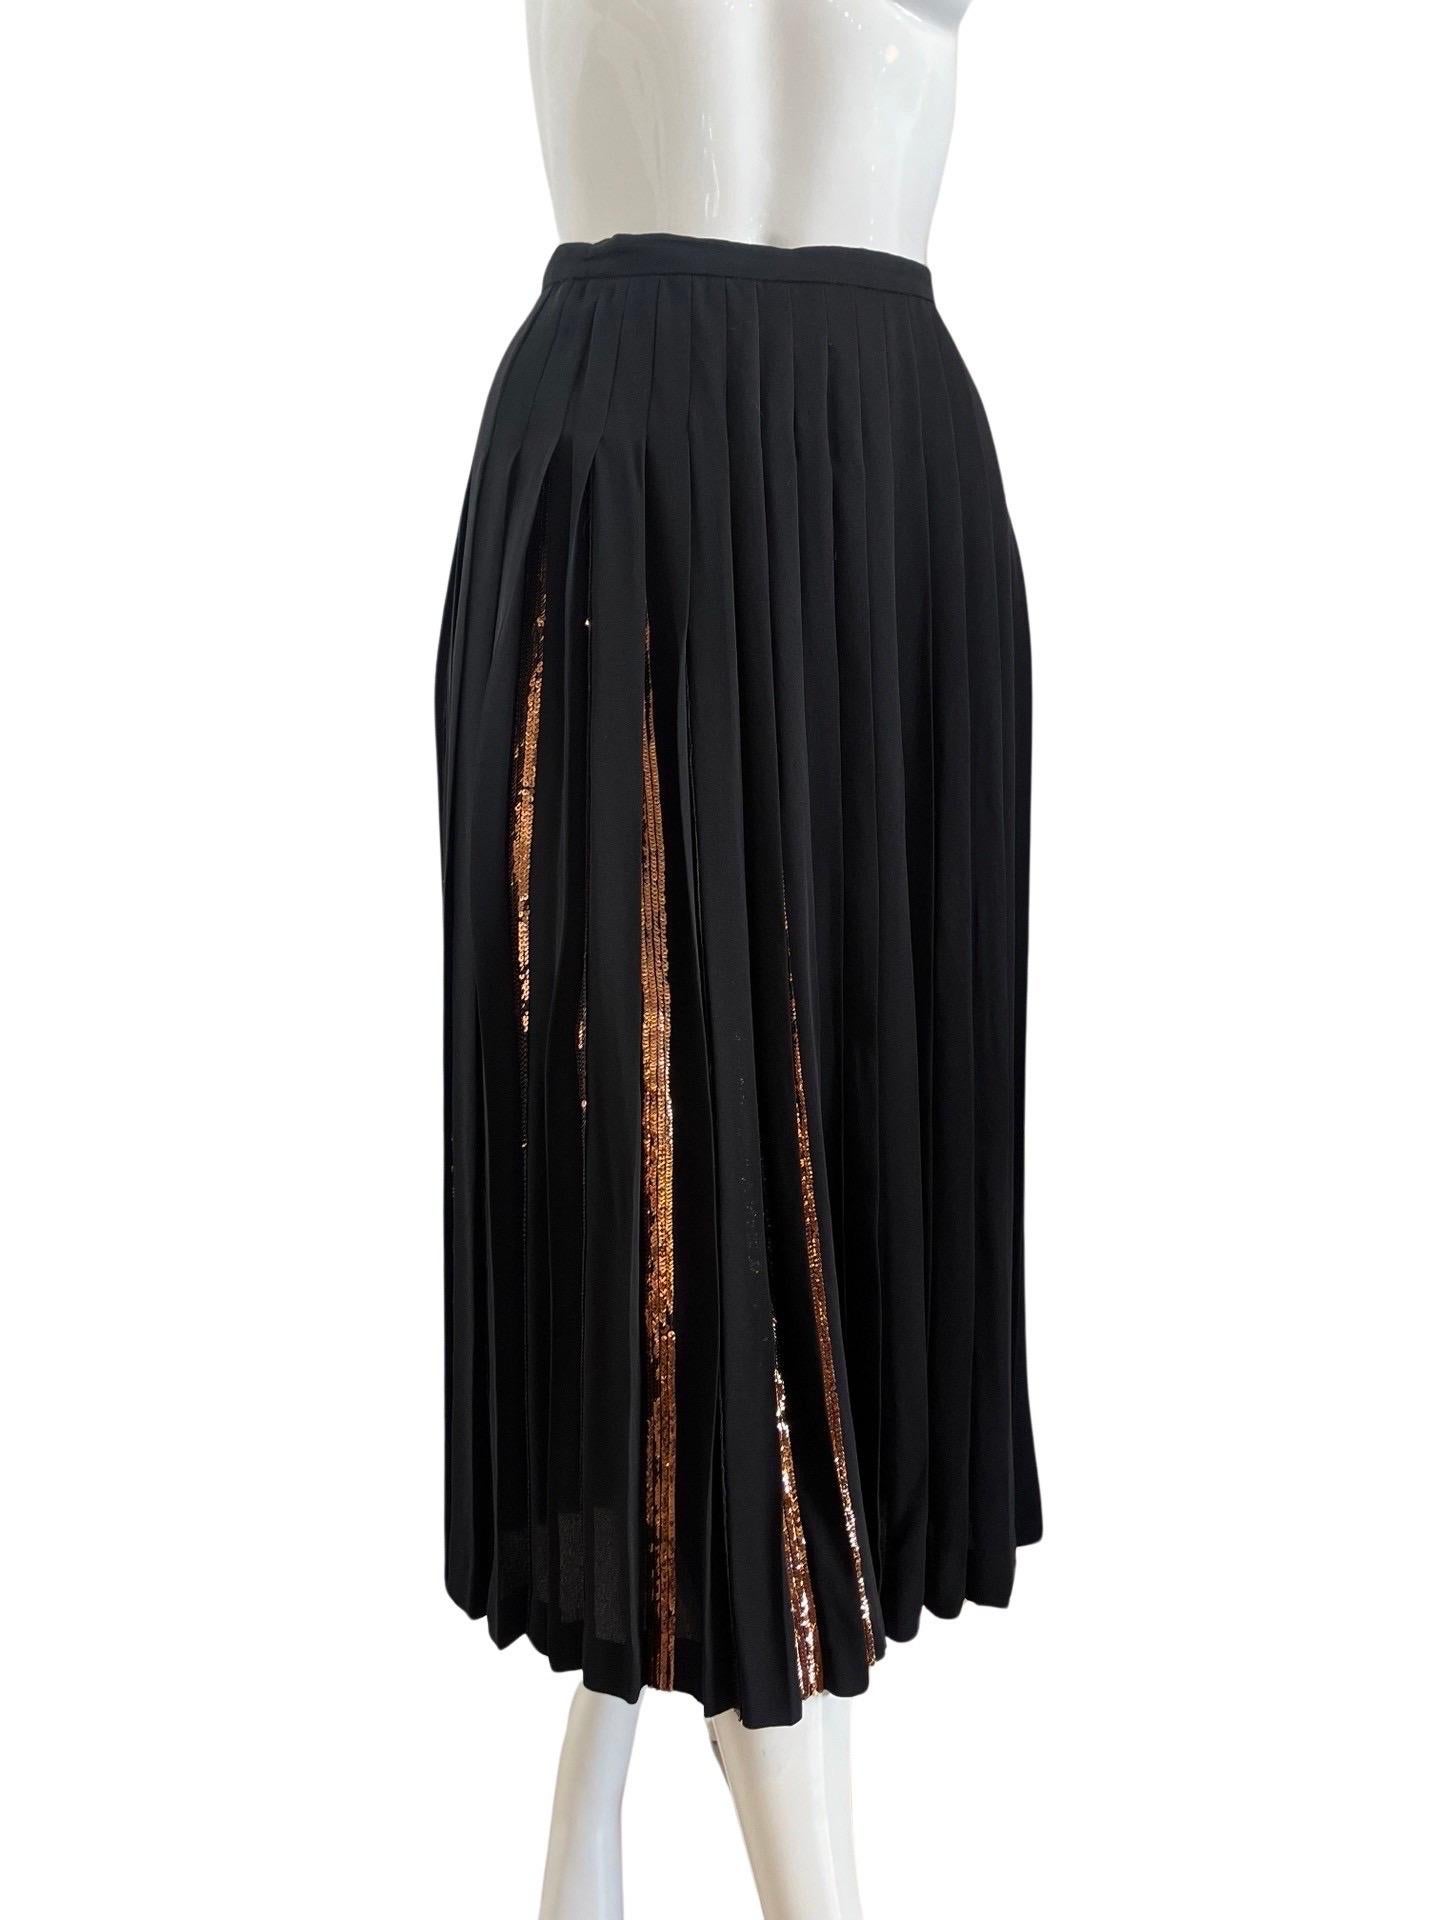 Beautiful 1980s Valentino pleated skirt with copper colored sequins inside the pleats. The beauty is in how this skirt moves and reveals the sequins and the copper color sequins are very beautiful.  The label on this skirt says a size 8, but the